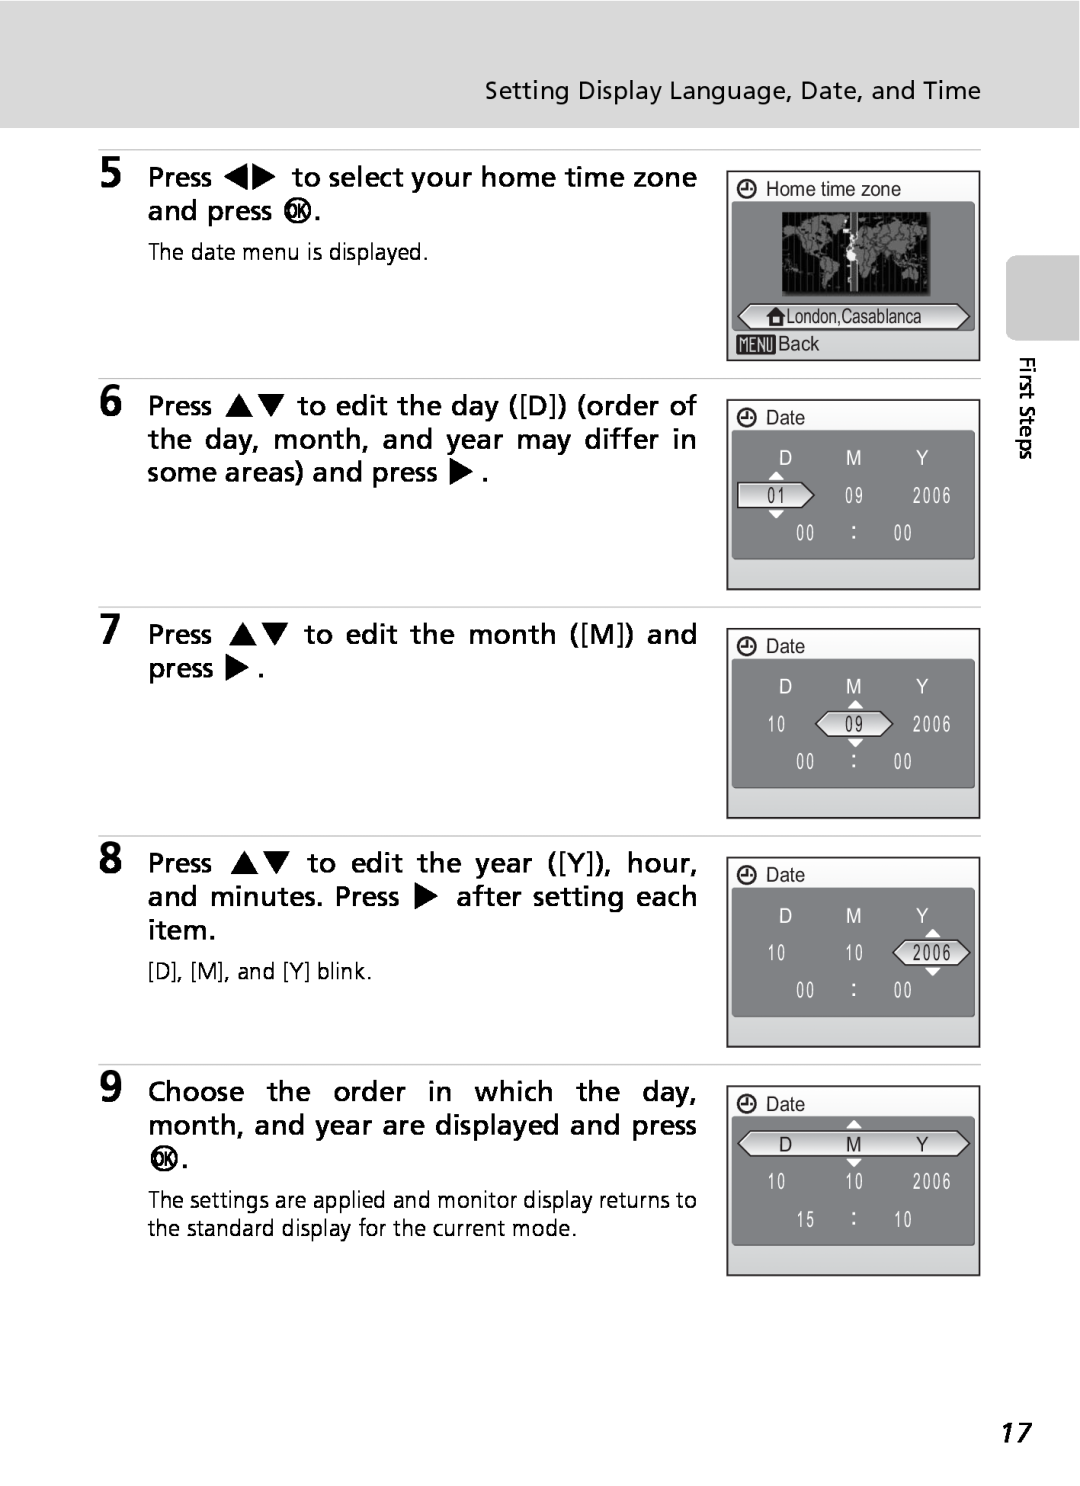 Nikon COOLPIXS9 manual Press GH to edit the day D order of, the day, month, and year may differ in, some areas and press J 